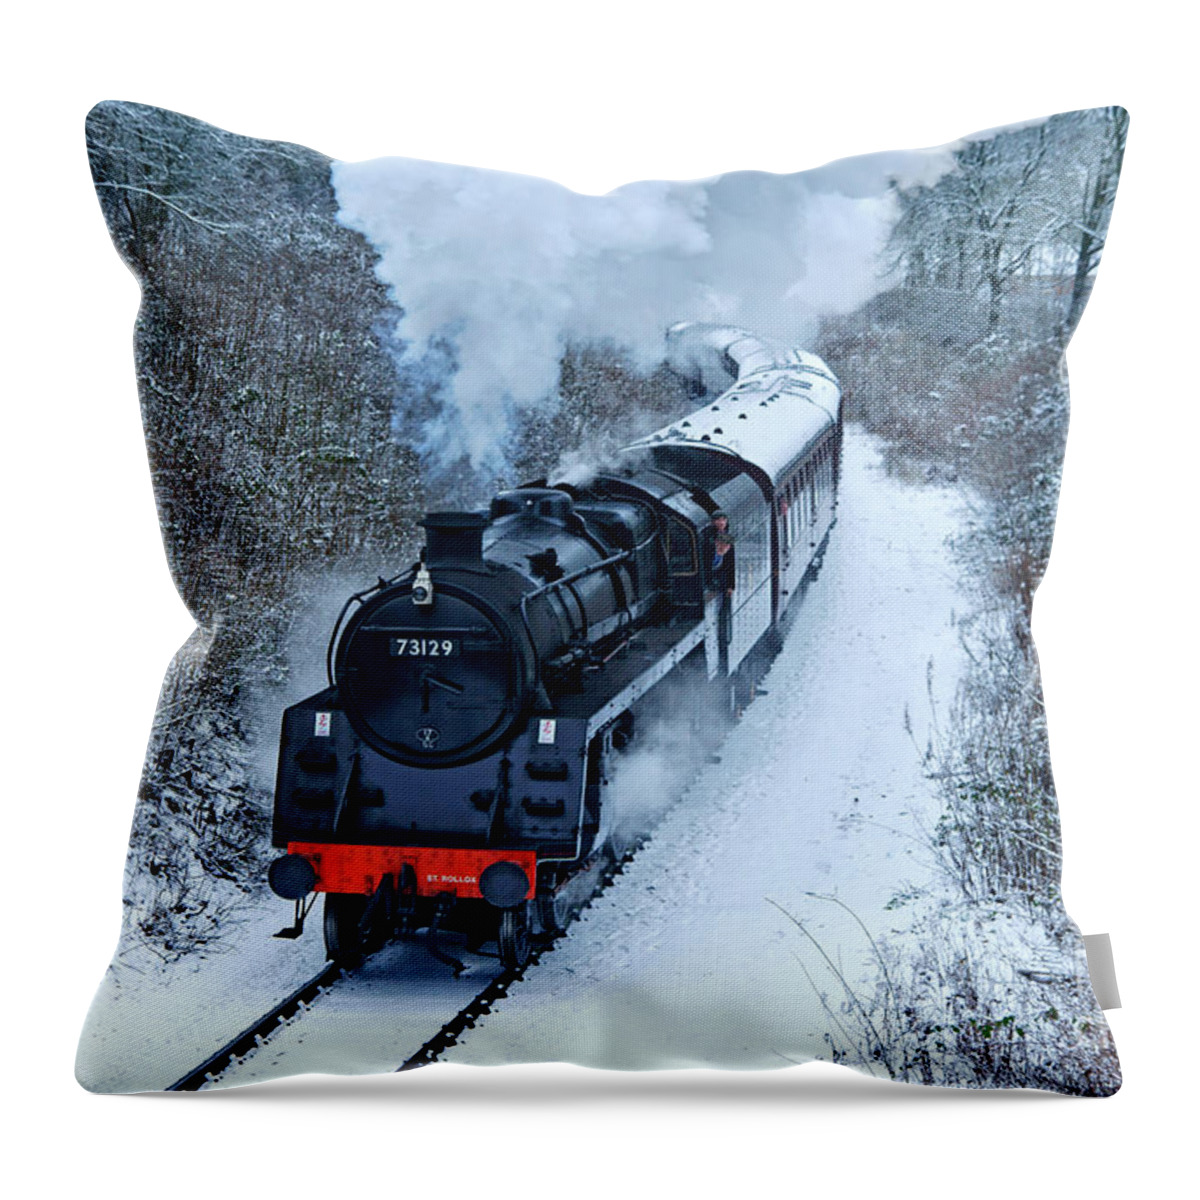 Steam Throw Pillow featuring the photograph Steam Locomotive 73129 In Snow by David Birchall